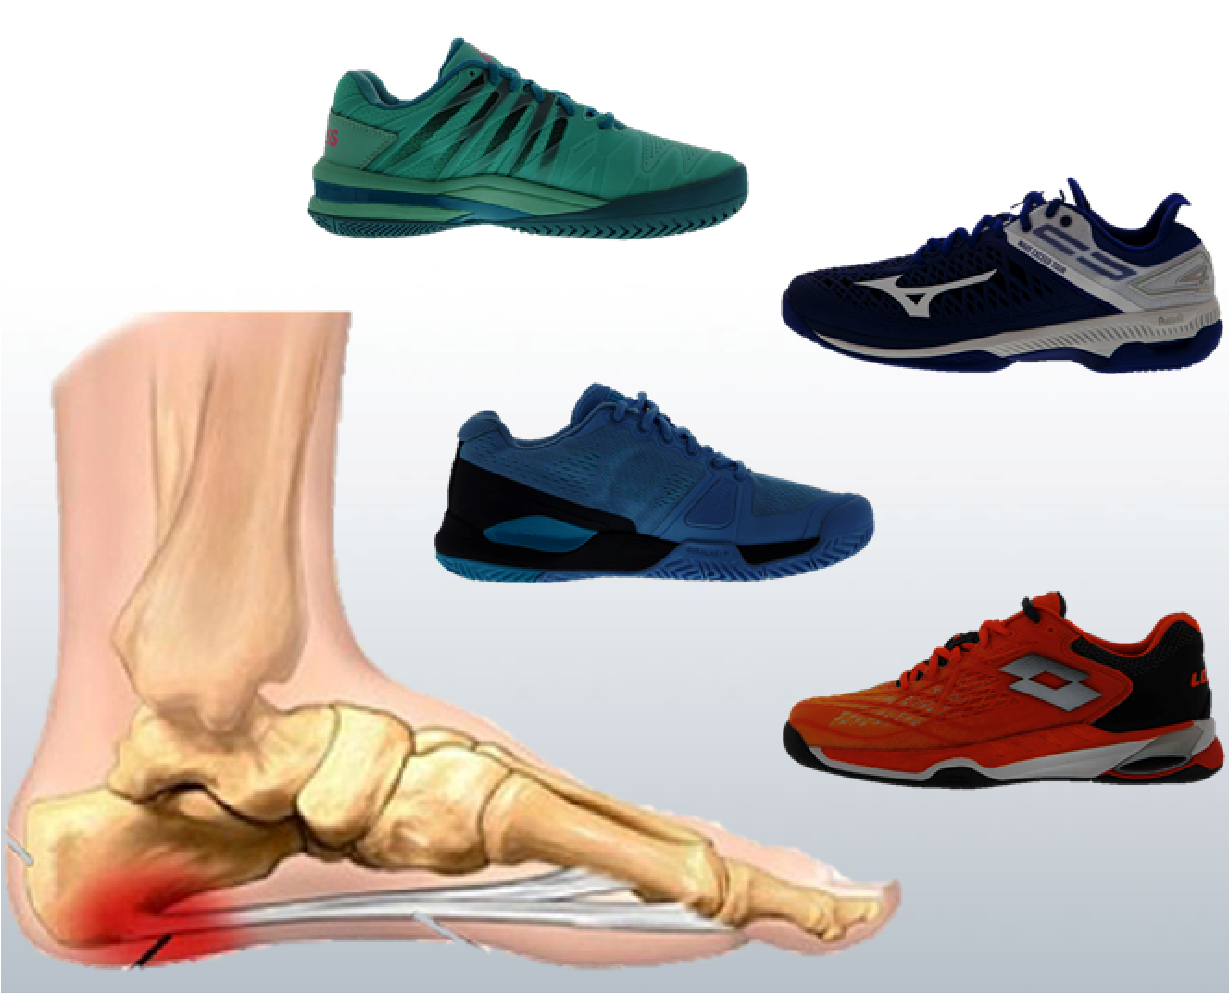 Step Up Your Foot Health: Best Shoes for Plantar Fasciitis Relief